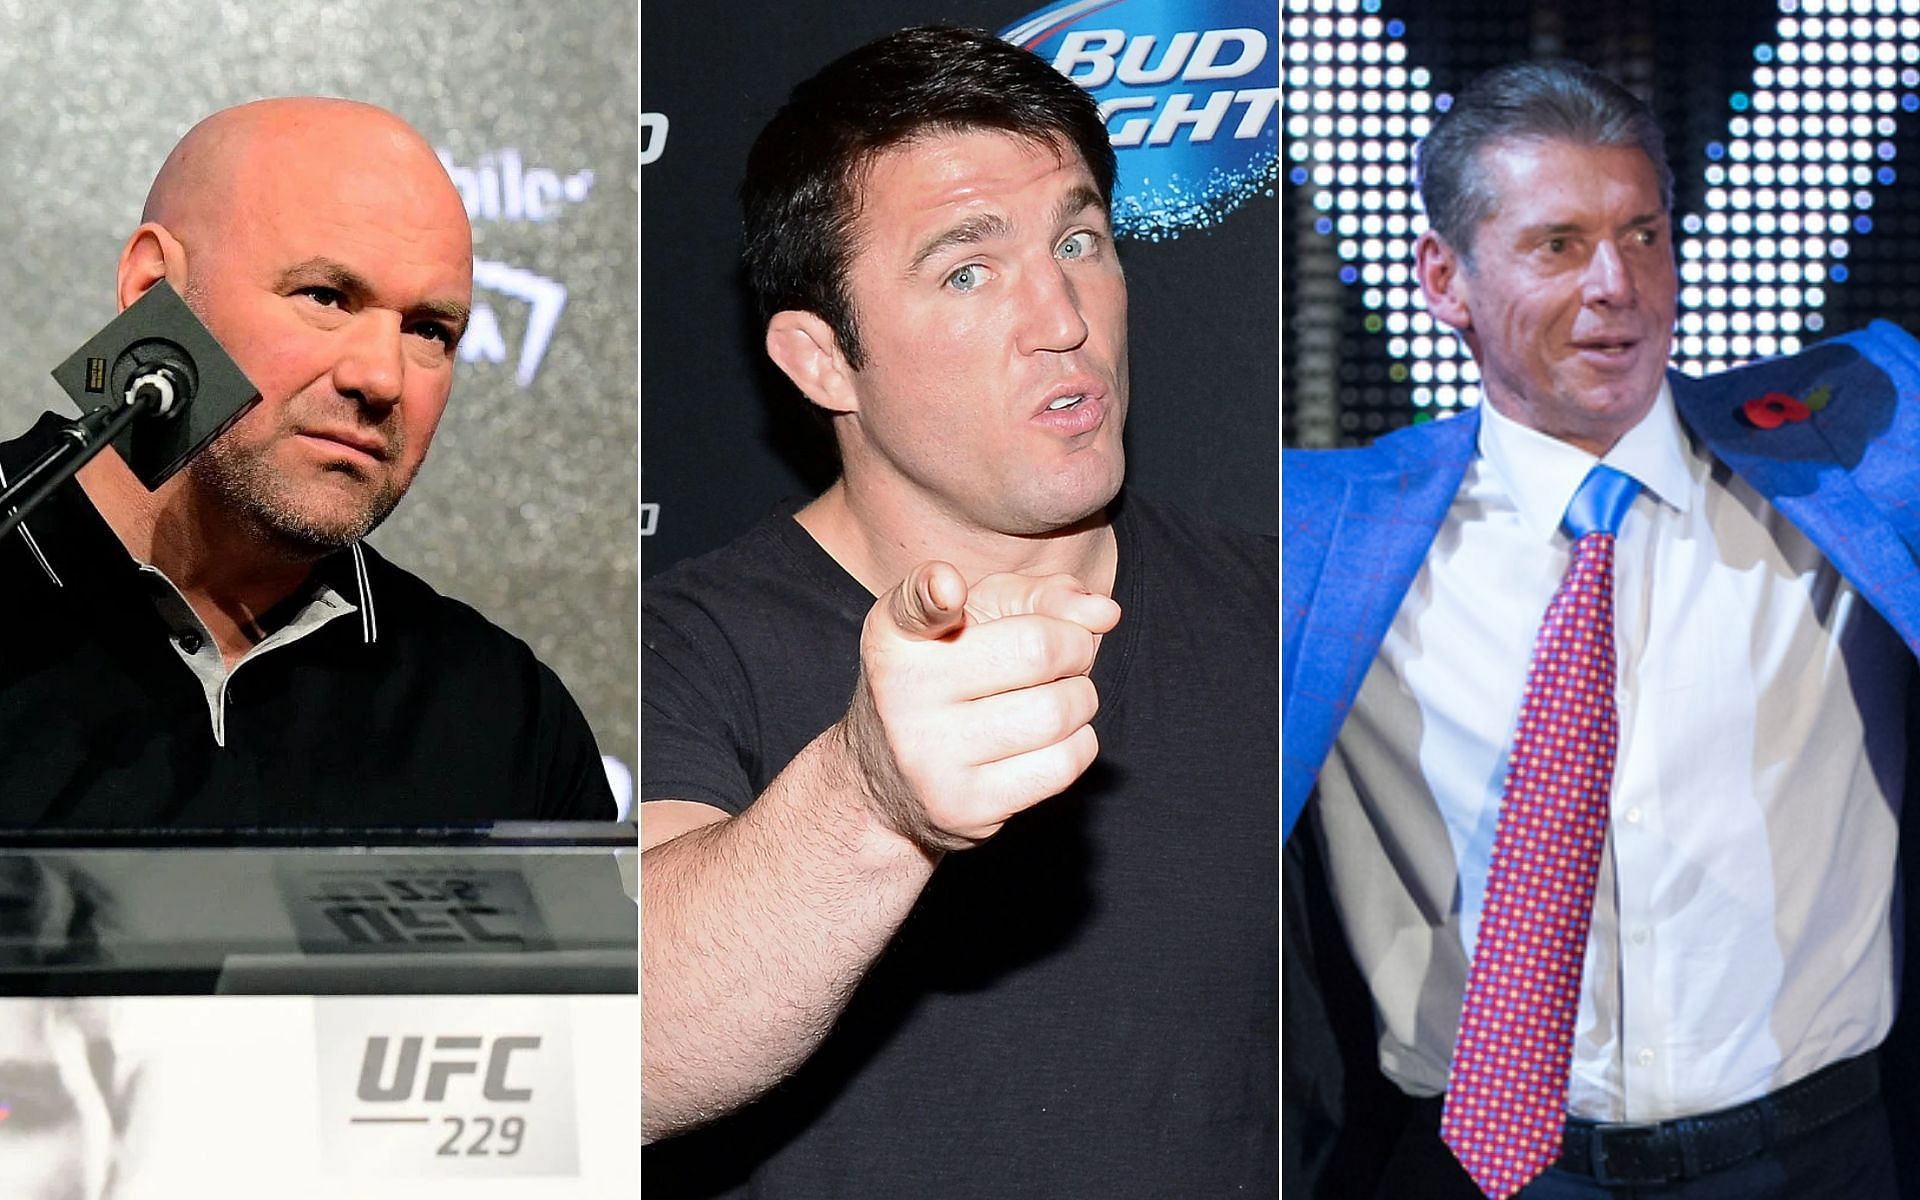 Dana White (Left), Chael Sonnen (Middle), and Vince McMahon (Right) [Photo credit: MMAFightingonSBN - YouTube, and wwe.com]